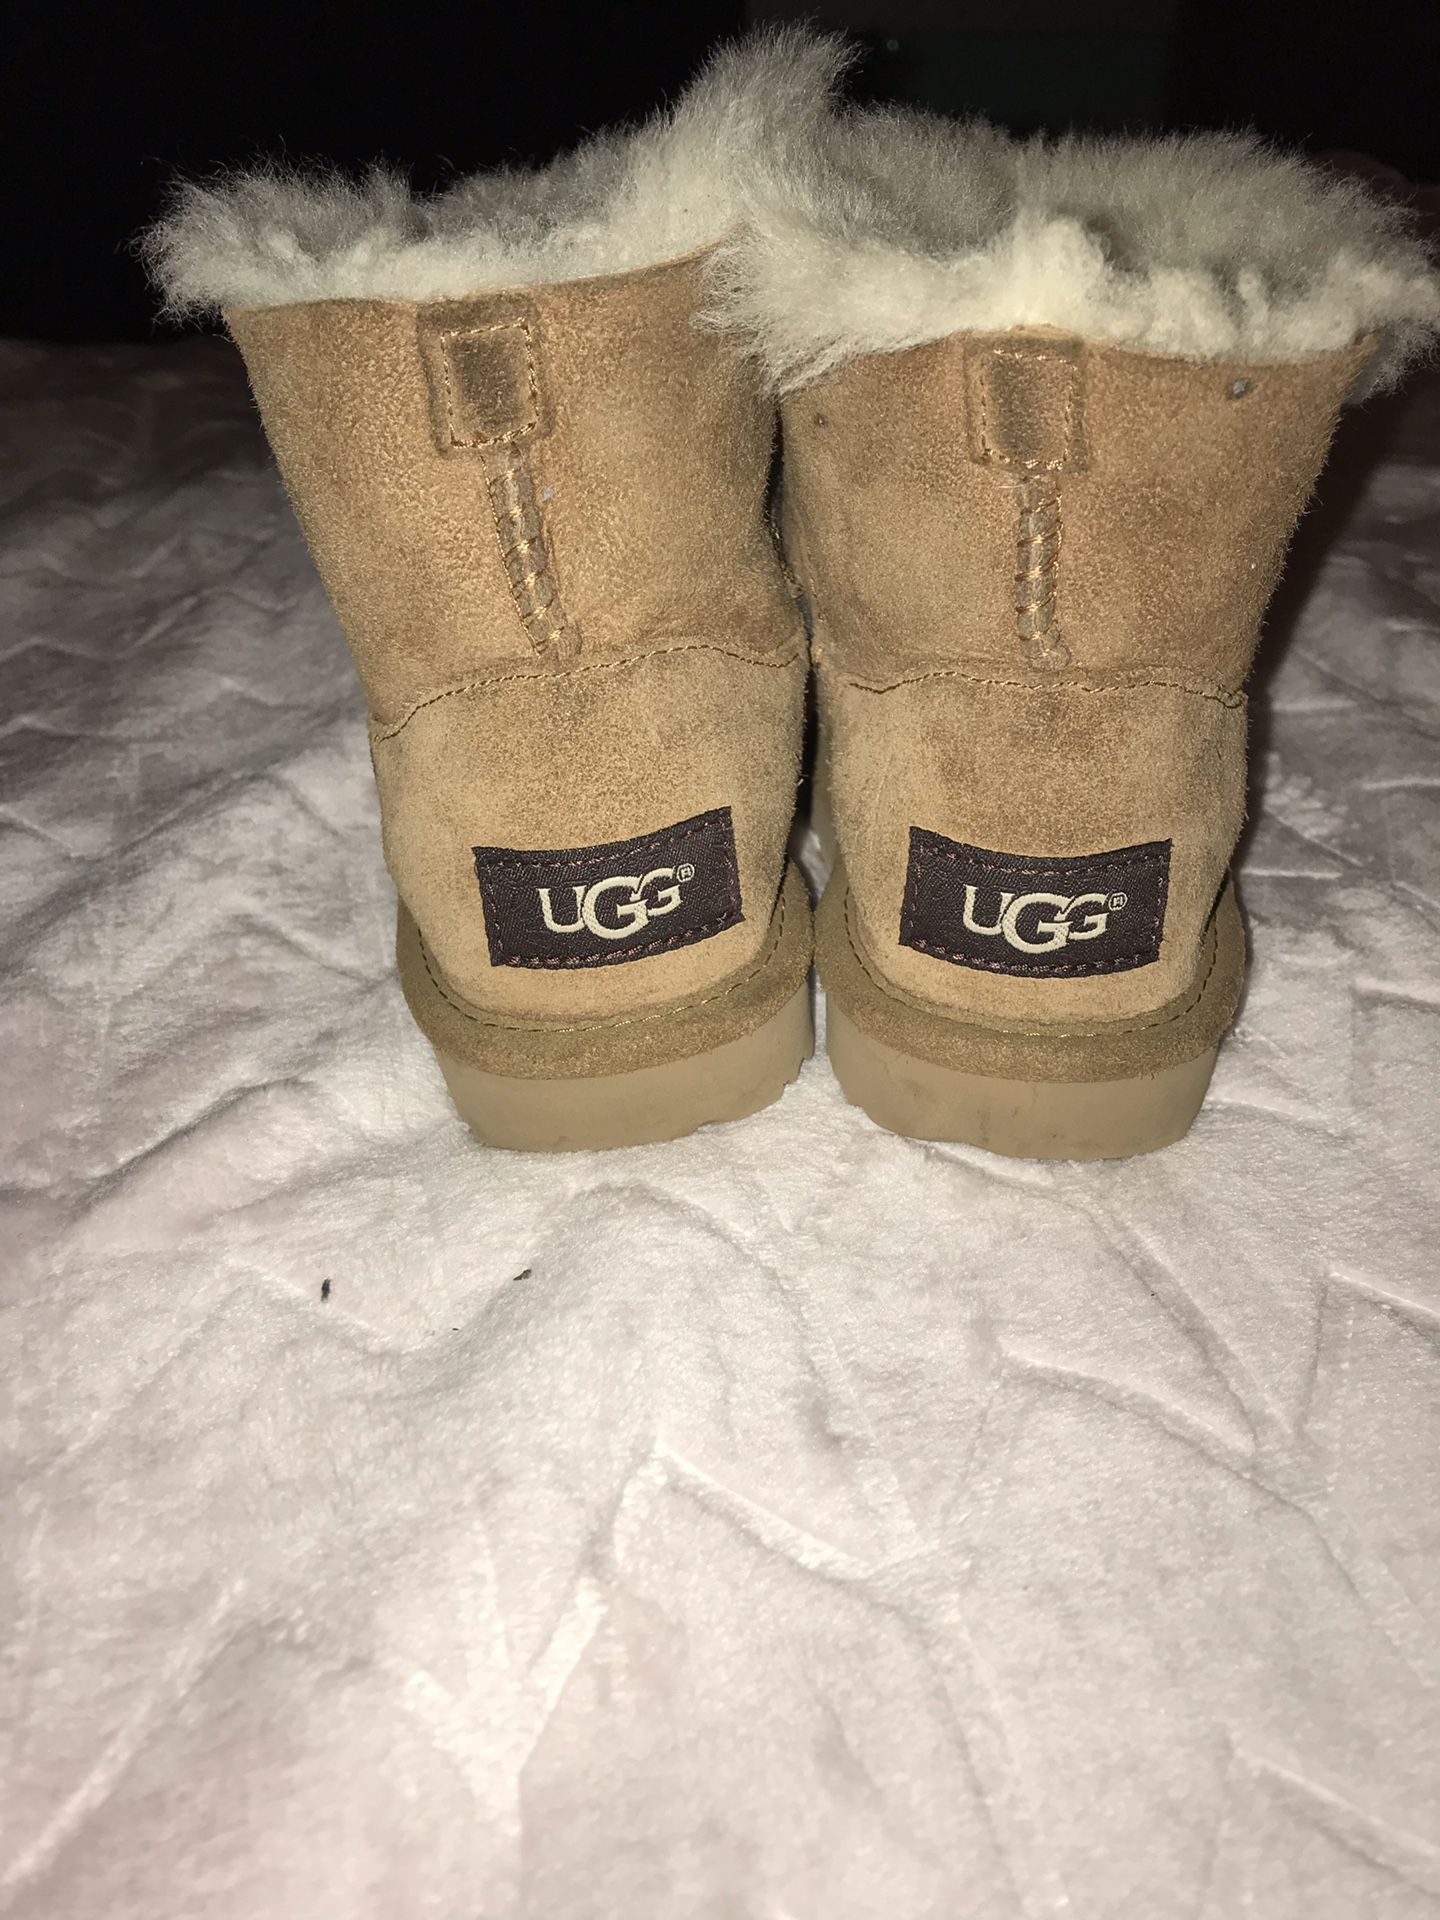 UGG toddler boots size 8